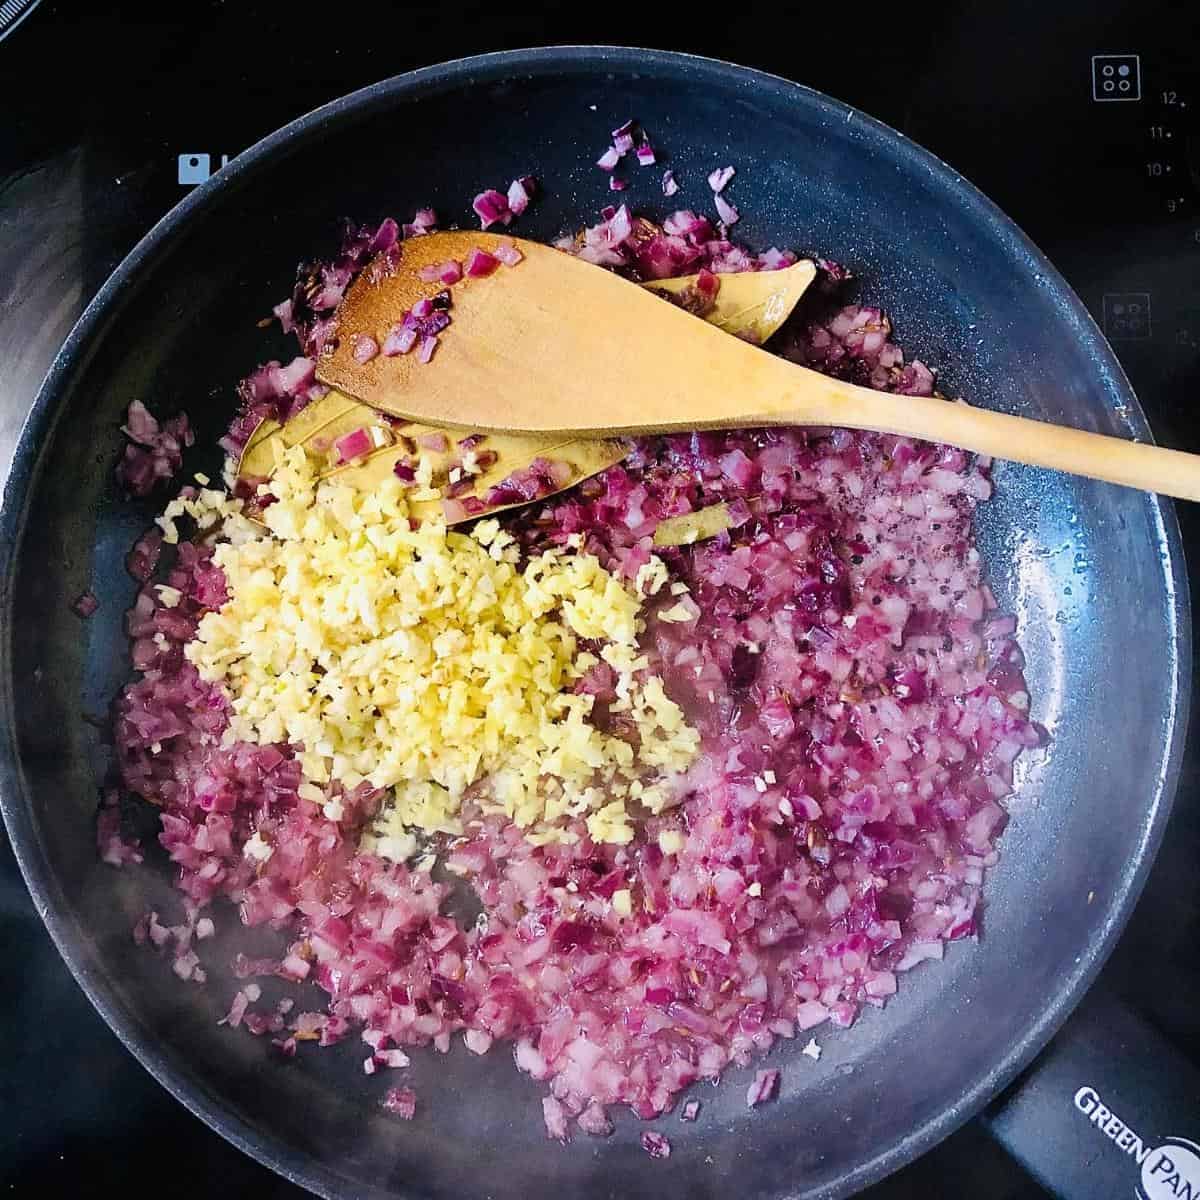 Finely chopped garlic and ginger added to finely chopped onion cooking in a frying pan